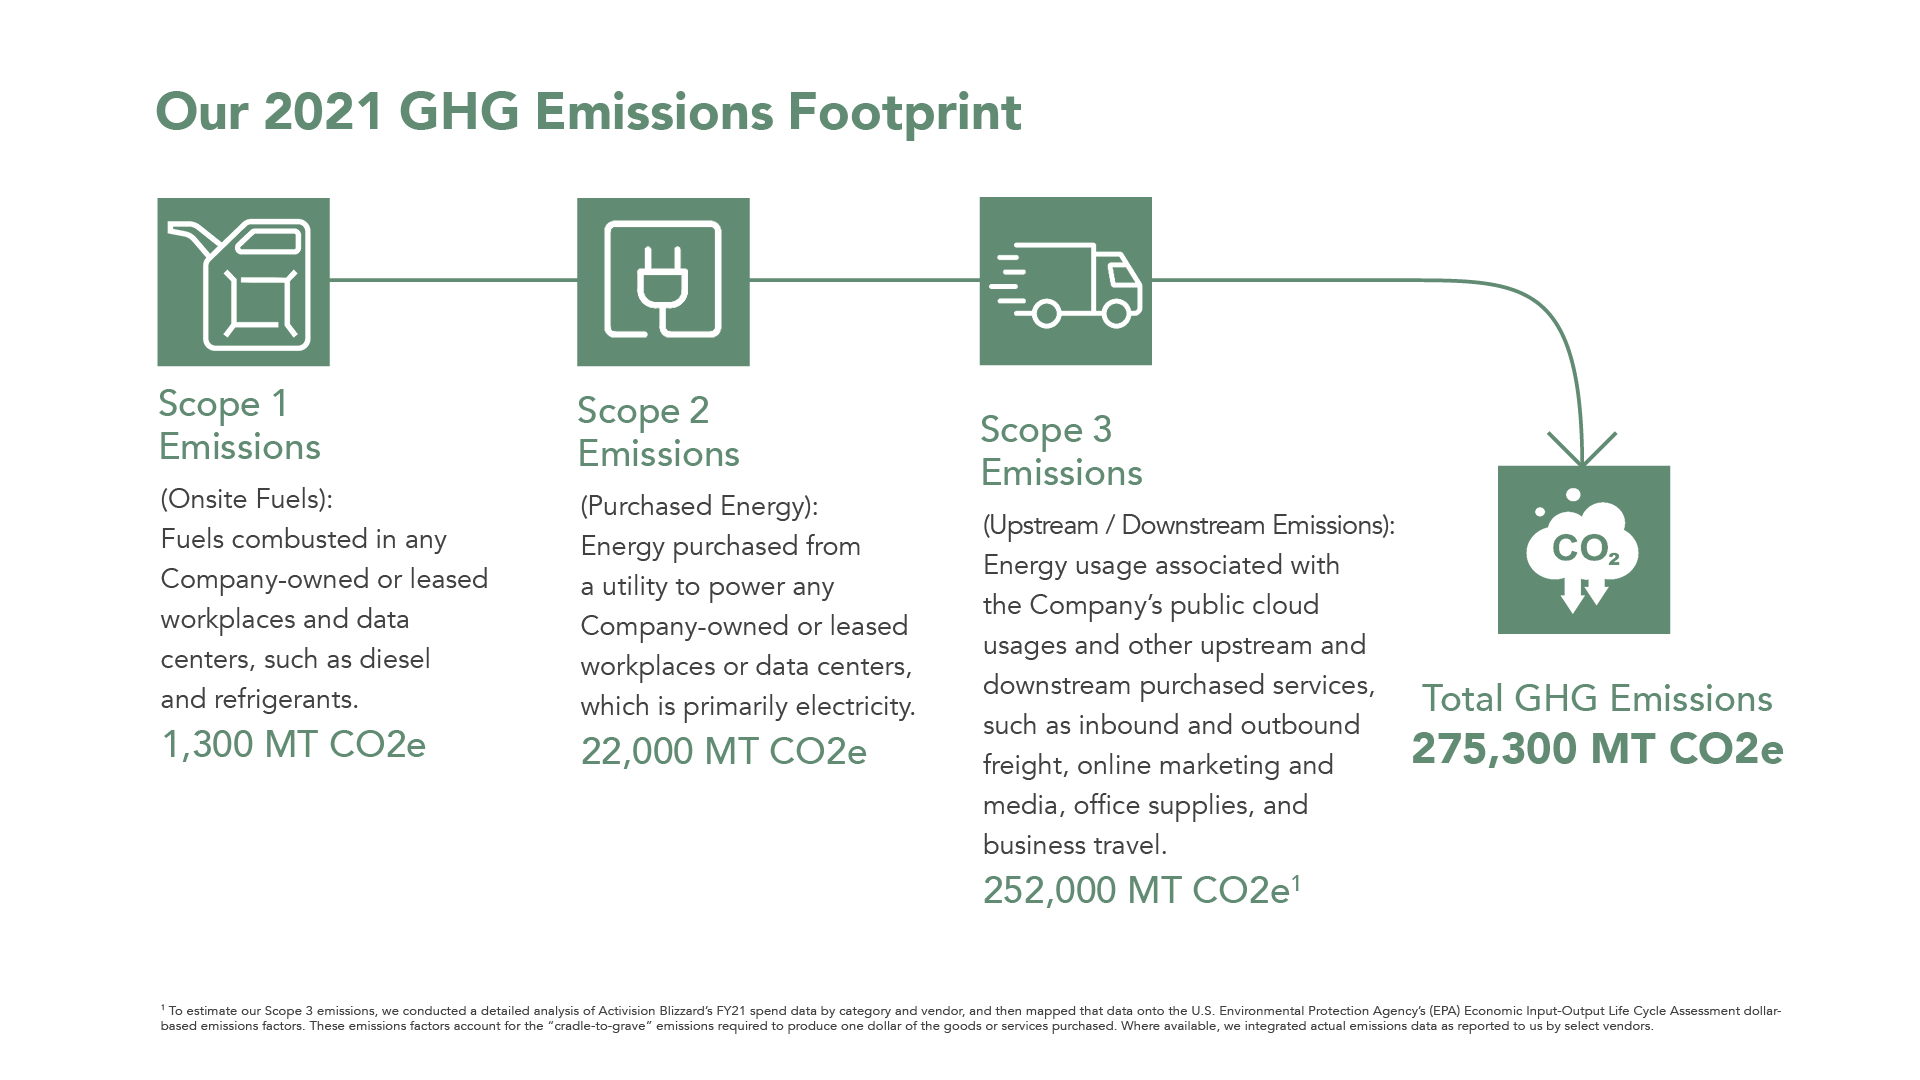 Information Graphic that reads: Our 2021 GHG Emissions Footprint. A flow chart starts with Scope 1 Emissions, with the description of onsite fuels. Fuels combusted in any company-owned or leased workplaces and data centers, such as diesel and refrigerants. Totals 1300 MT CO2e. Flow chart continues to Scope 2 Emissions. Purchased energy, as in energy purchased from a utility to power any company-owned or leased workplaces or data centers, which is primarily electricity. Totals 22,000 MT CO2e. Flow chart continues to Scope 3 Emissions. Upstream/downstream emissions, as in energy usage associated with the company's public cloud usages and other upstream and downstream purchased services, such as inbound and outbound freight, online marketing and media, office supplies, and business travel. Total 252,000 MT CO2e (footnote reads: To estimate our Scope 3 Emissions, we conducted a detailed analysis of Activision Blizzard's FY21 spend data by category and vendor, and then mapped that data onto the U.S. Environmental Protection Agency's (EPA) Economic Input-Output Life Cycle Assessment dollar-based emissions factors. These emissions factors account for the "cradle-to-grave" emissions to produce one dollar of the goods or services purchased. Where available, we integrated actual emissions data as reported to us by select vendors.) The flow chart ends with Total GHG Emissions equaling 275,300 MT CO2e.